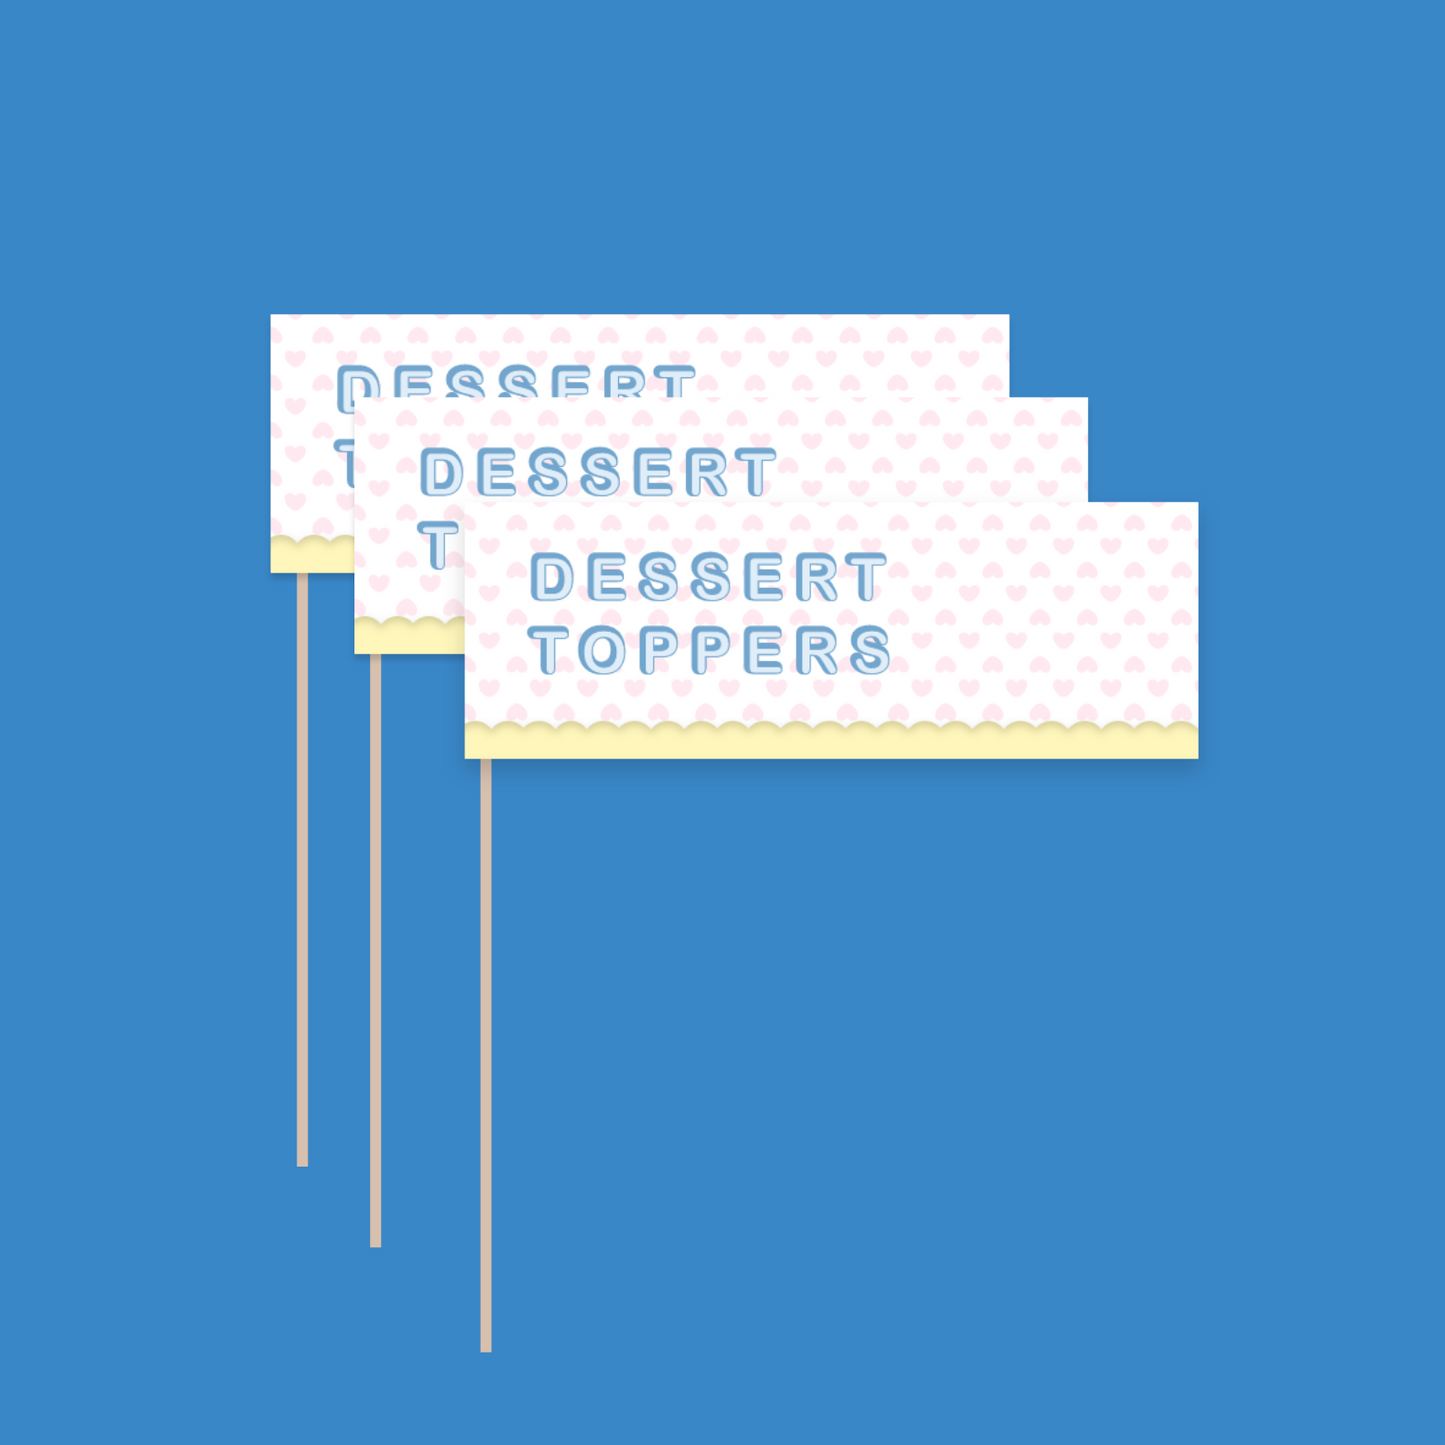 Dessert Toppers